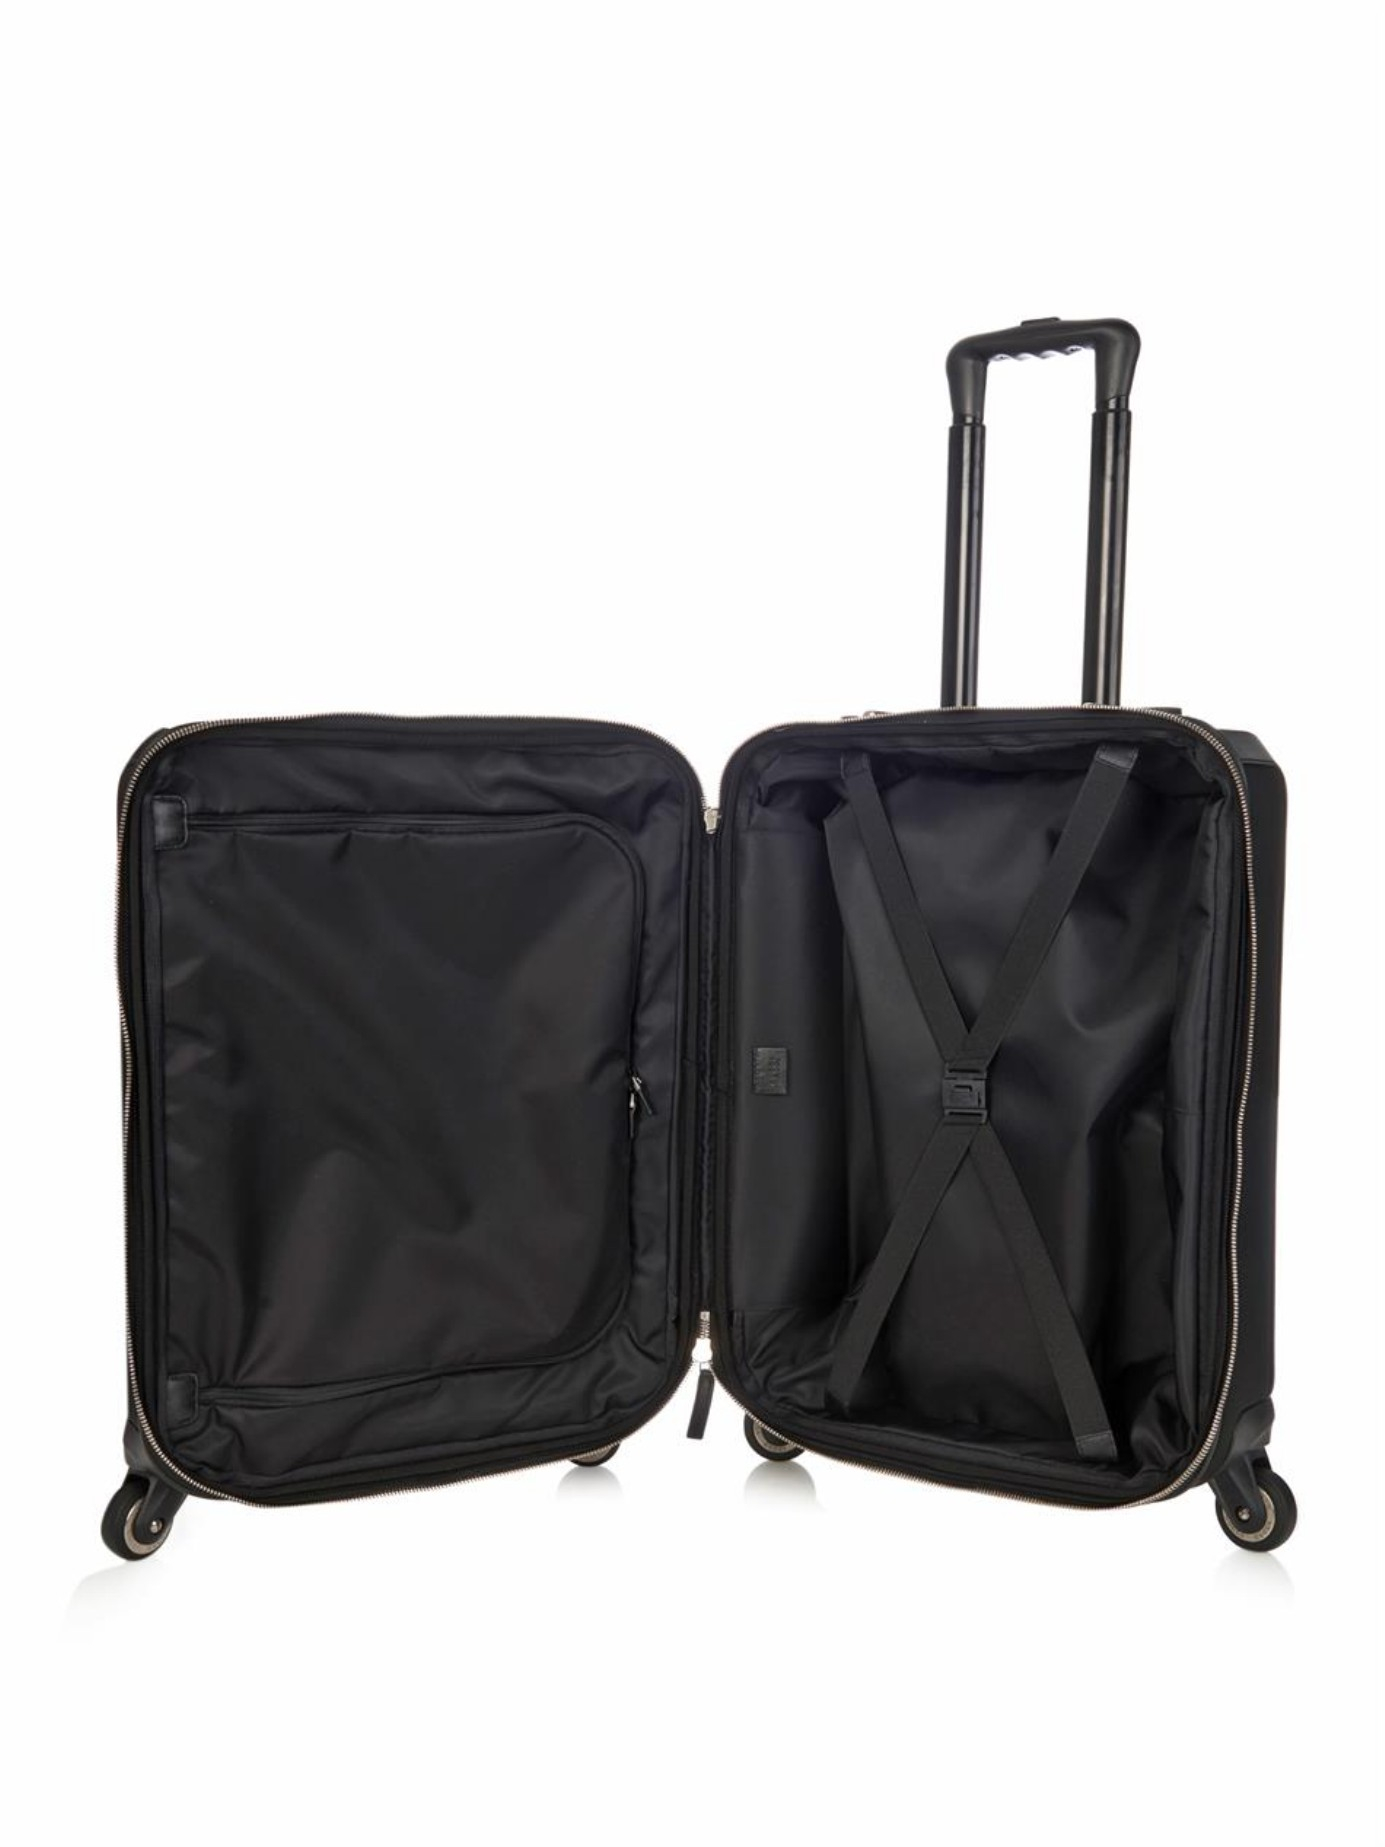 Lyst - Gucci Classic Canvas Trolley Suitcase in Black for Men